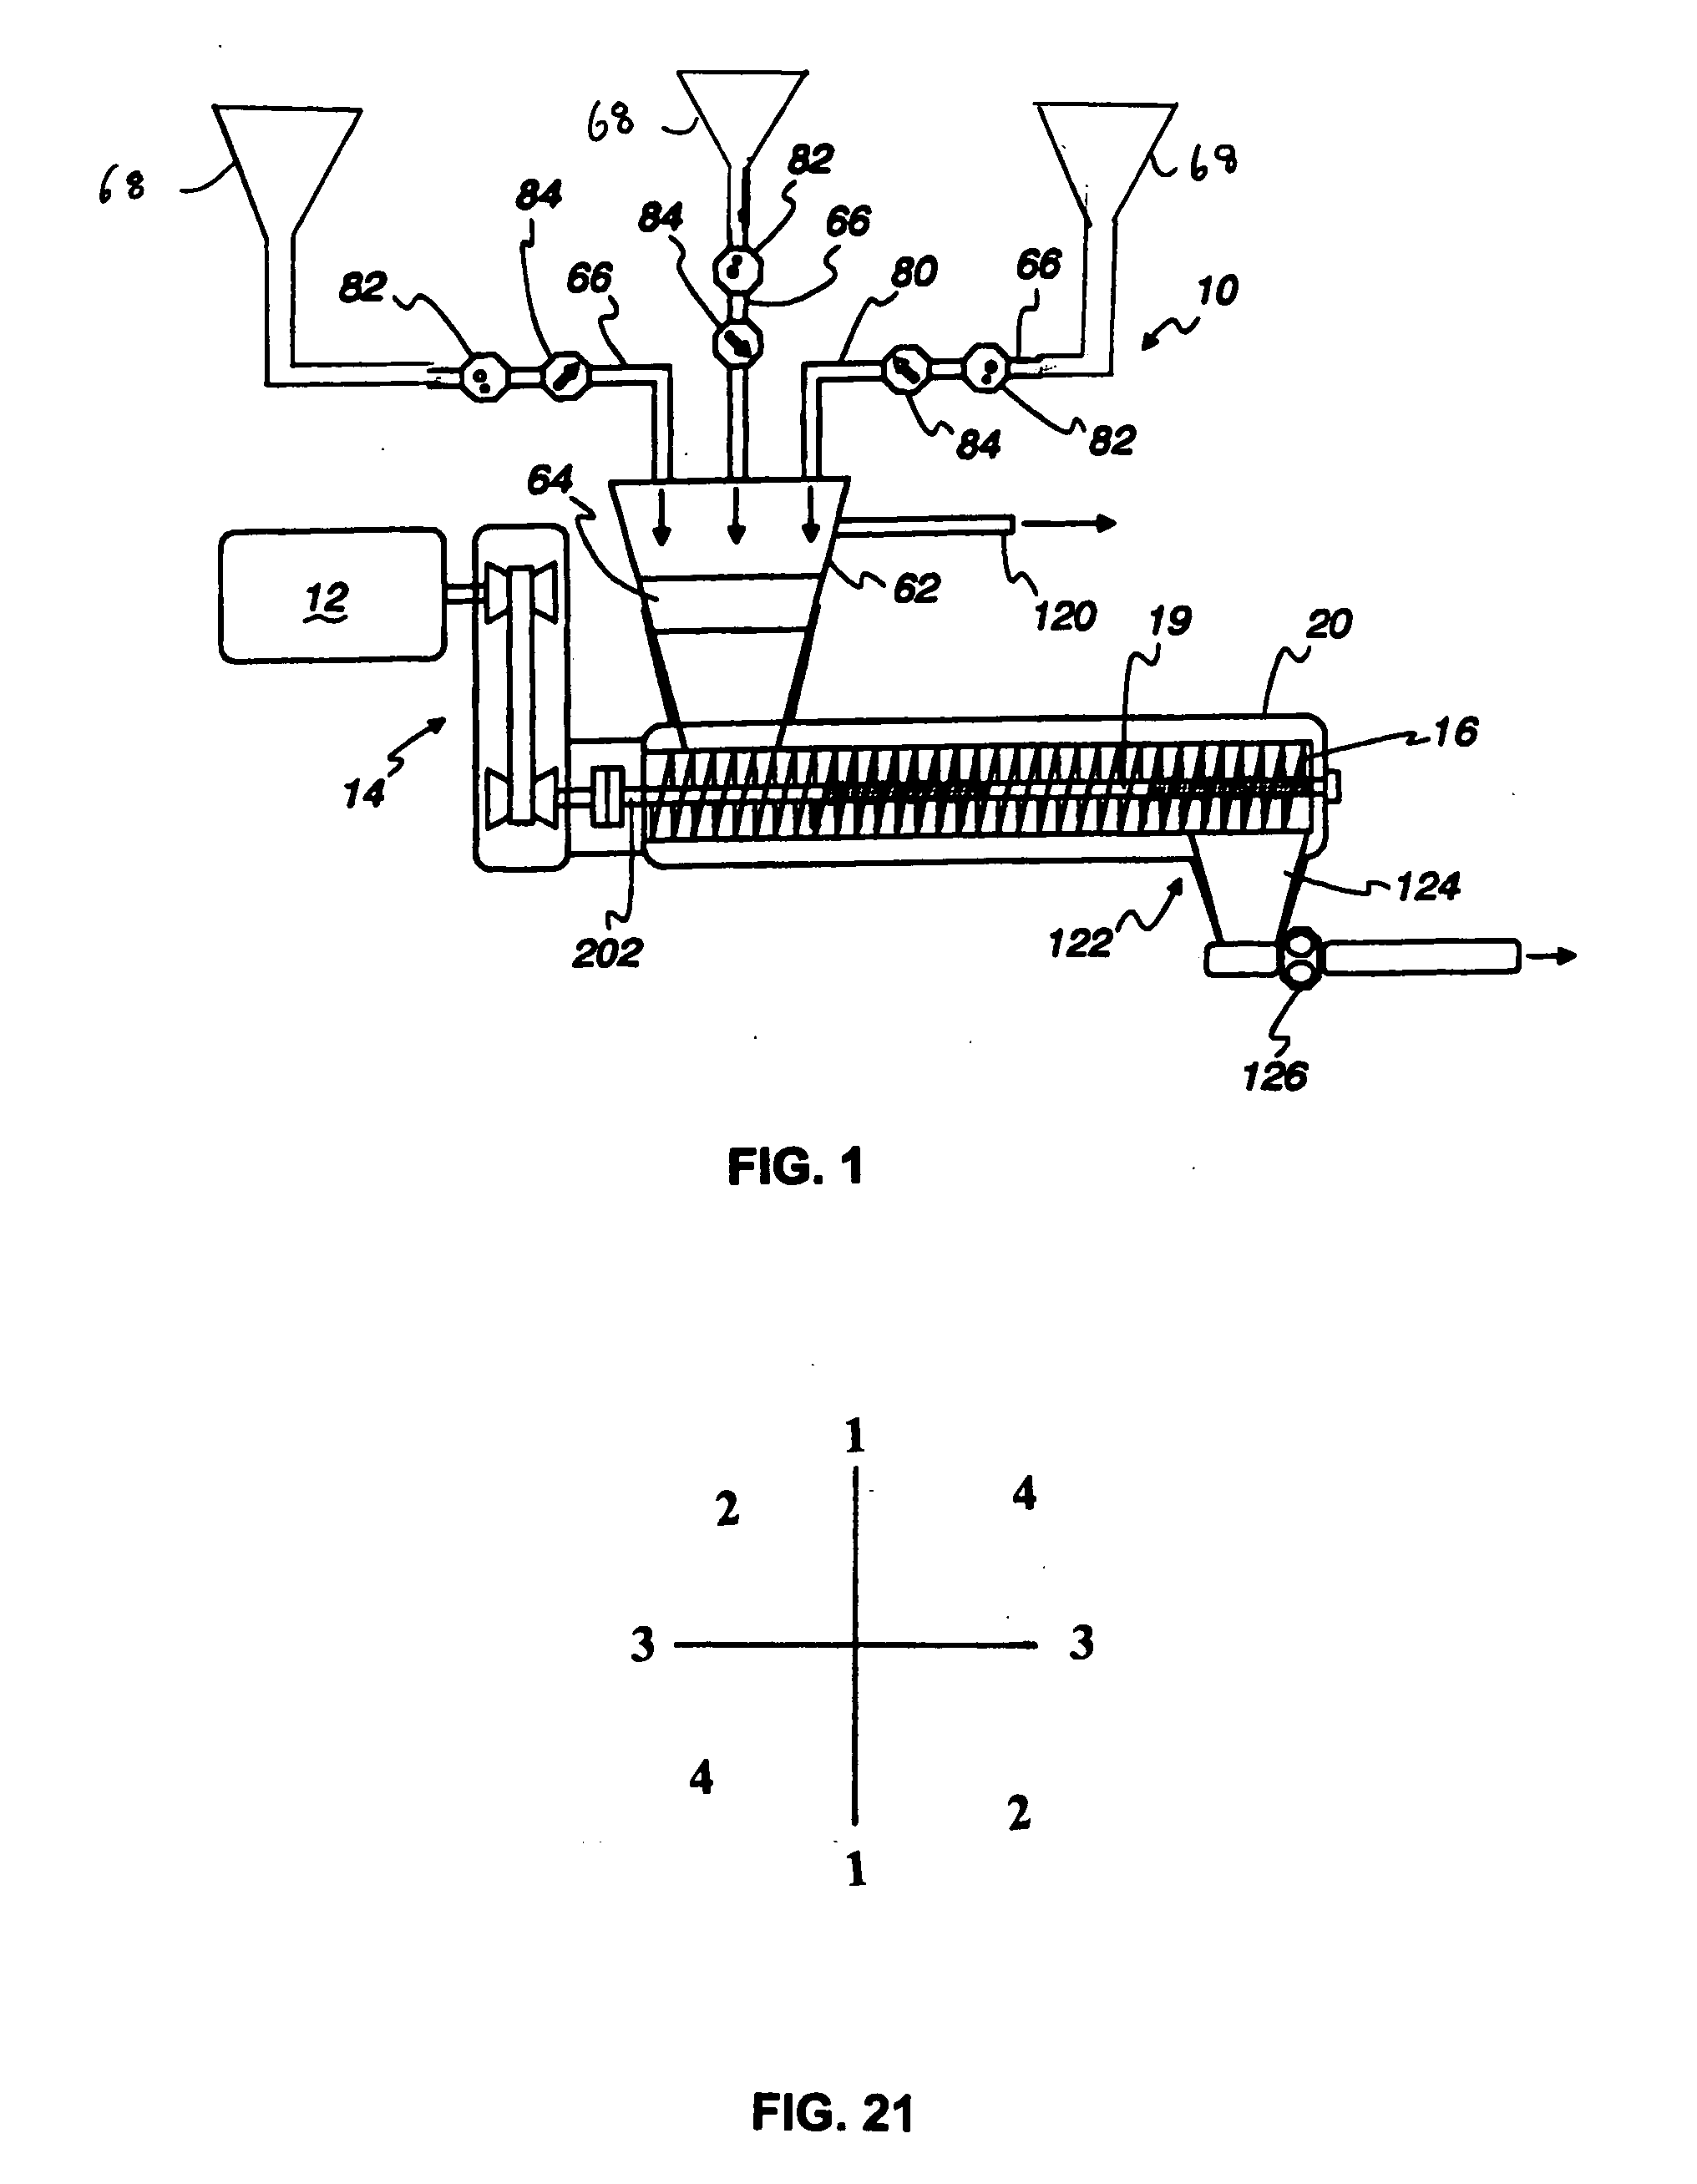 Meat processing system